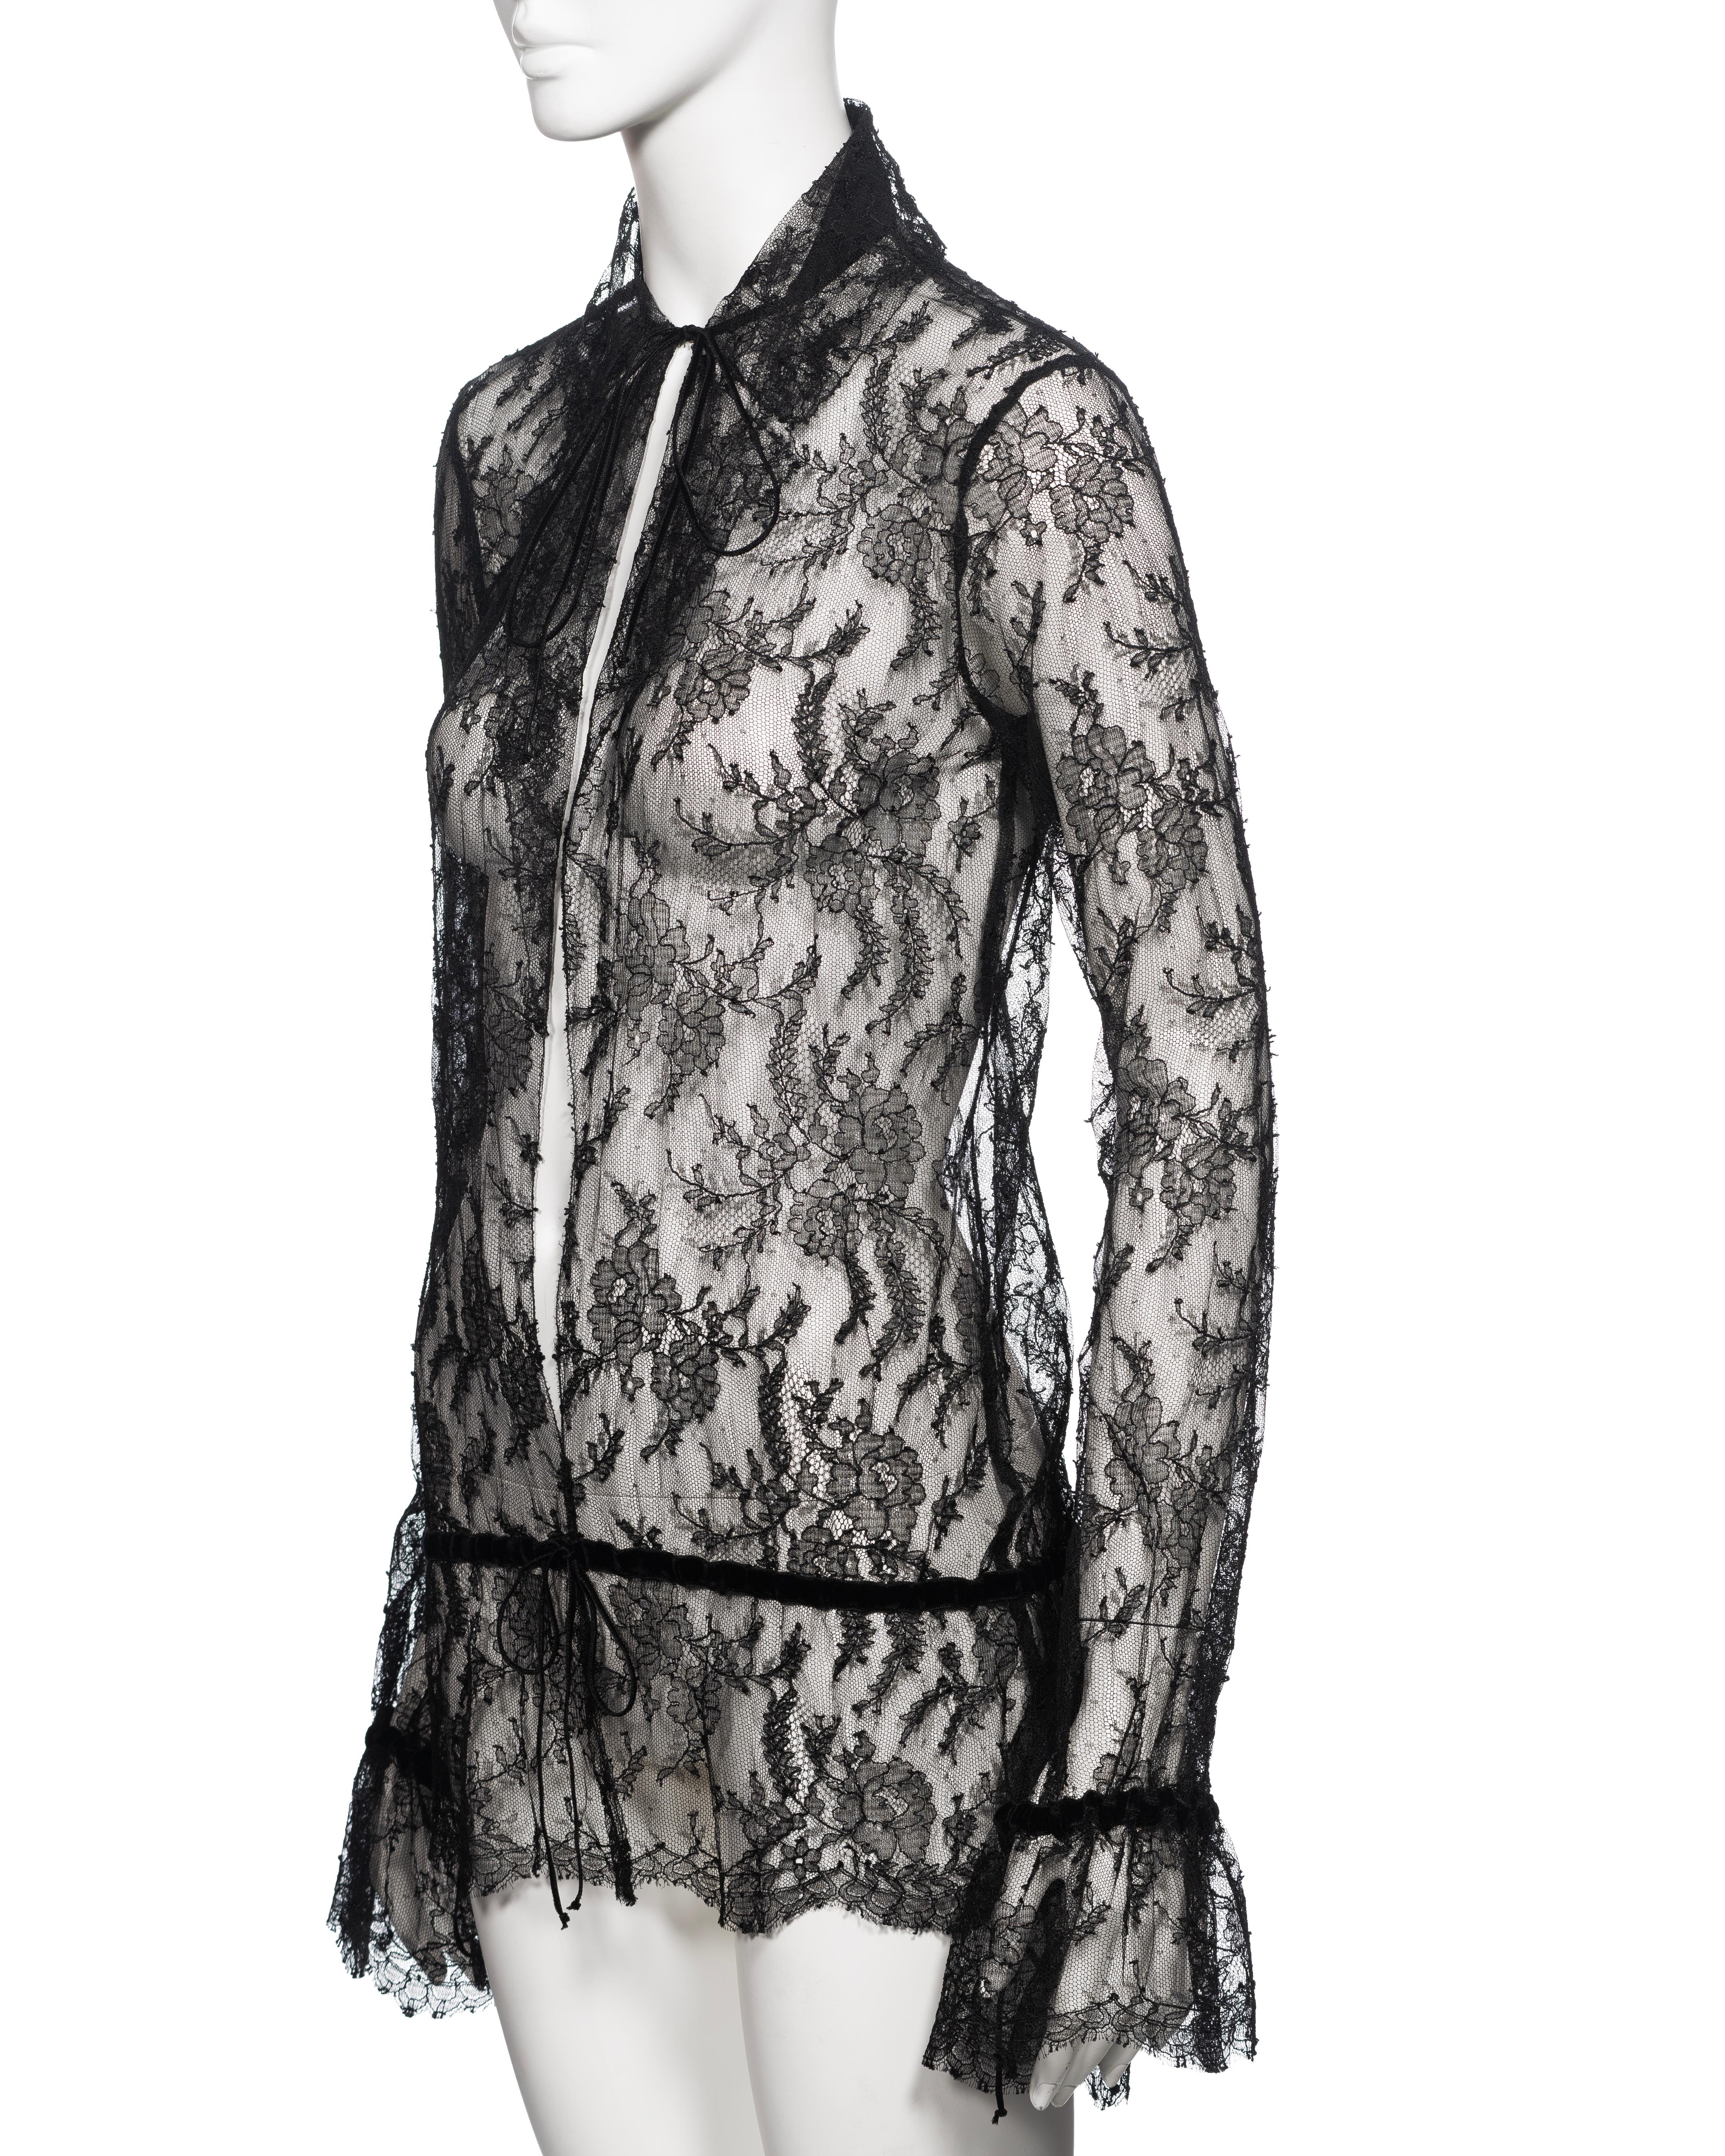 Chanel by Karl Lagerfeld Black Lace Blouse with Velvet Ribbon Trim, FW 2004 5